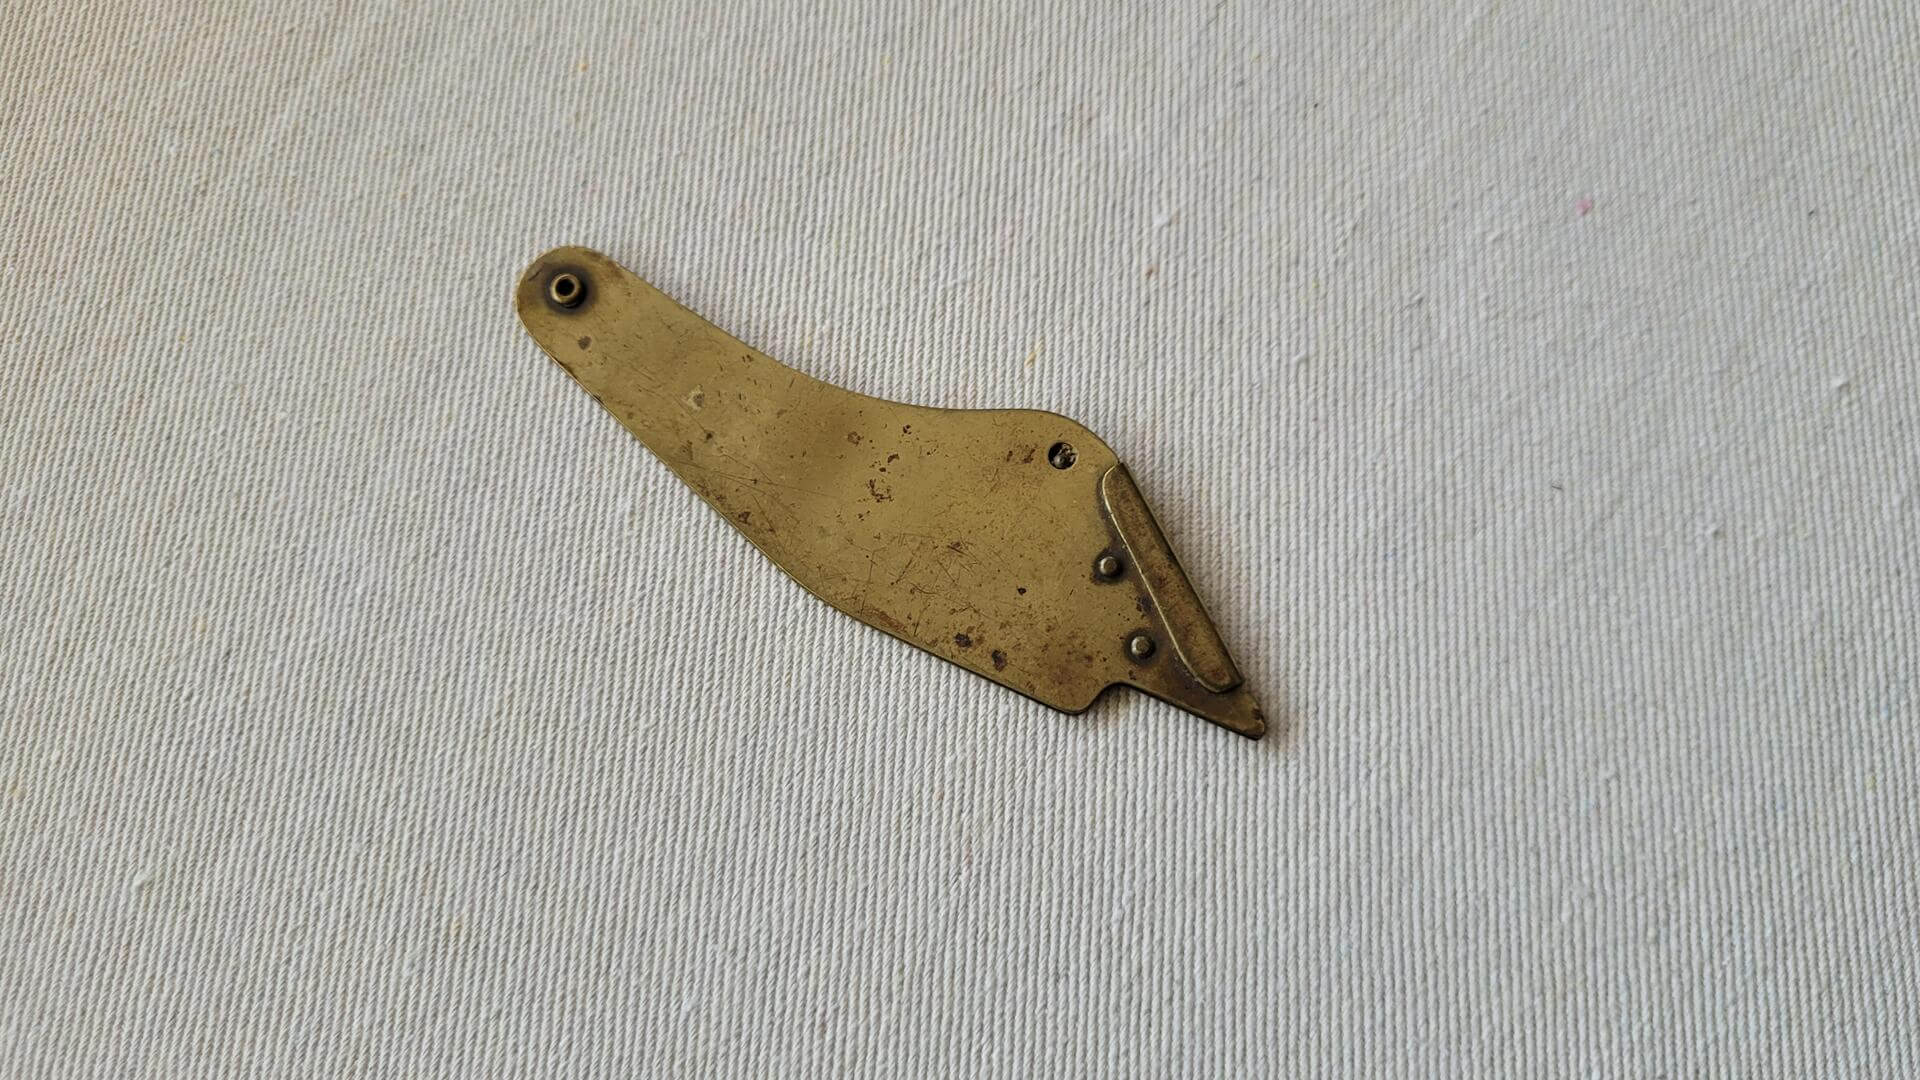 Rare antique solid brass Schul-Sons razor knife blade holder used as furrier's knife. Vintage made in USA collectible furrier and cobbler cutting hand tools